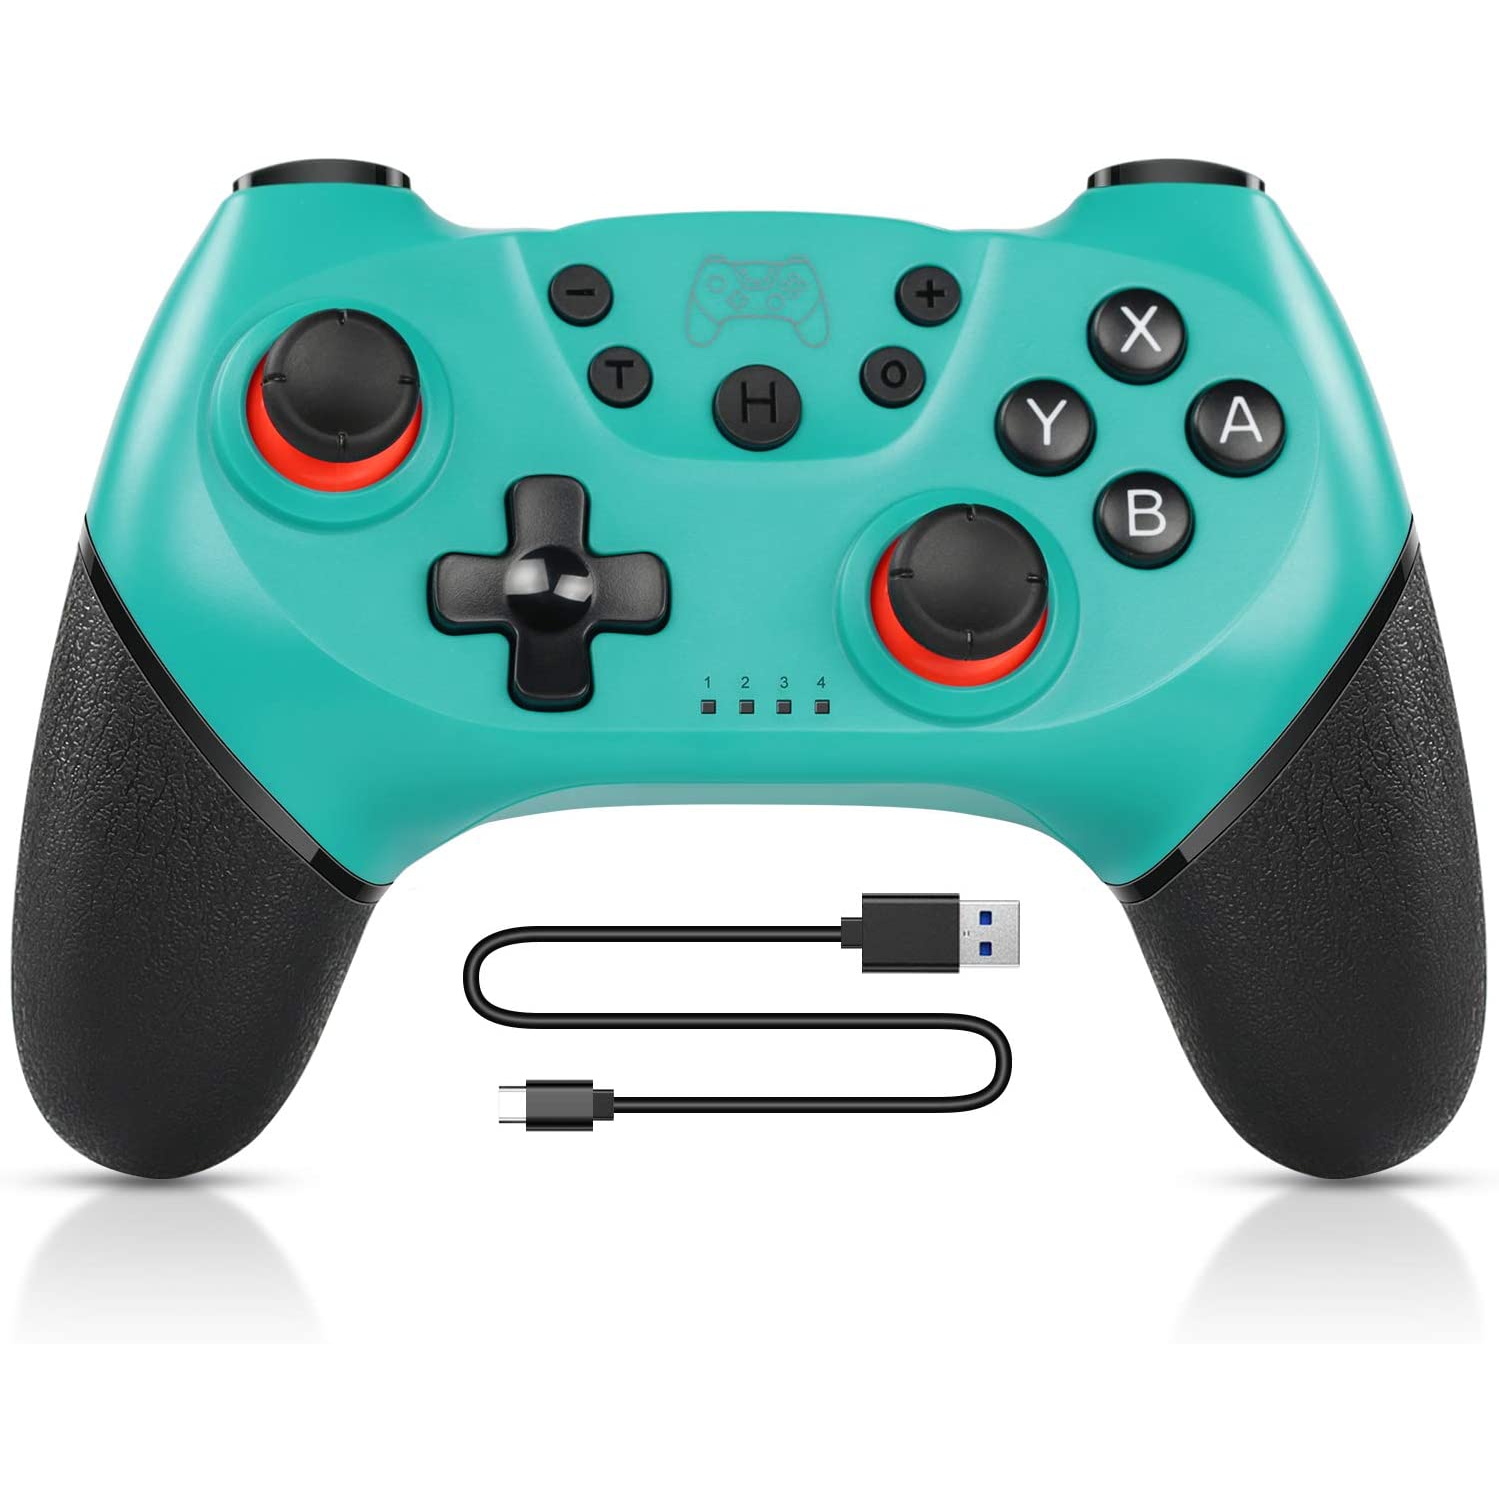 2021 New Design Wireless Pro Controllers for Nintendo Switch & Switch Lite Bluetooth Switch Controllers Gamepad Joystick Console,PC Controller Supports Gyro Axis Turbo and Dual Vibration